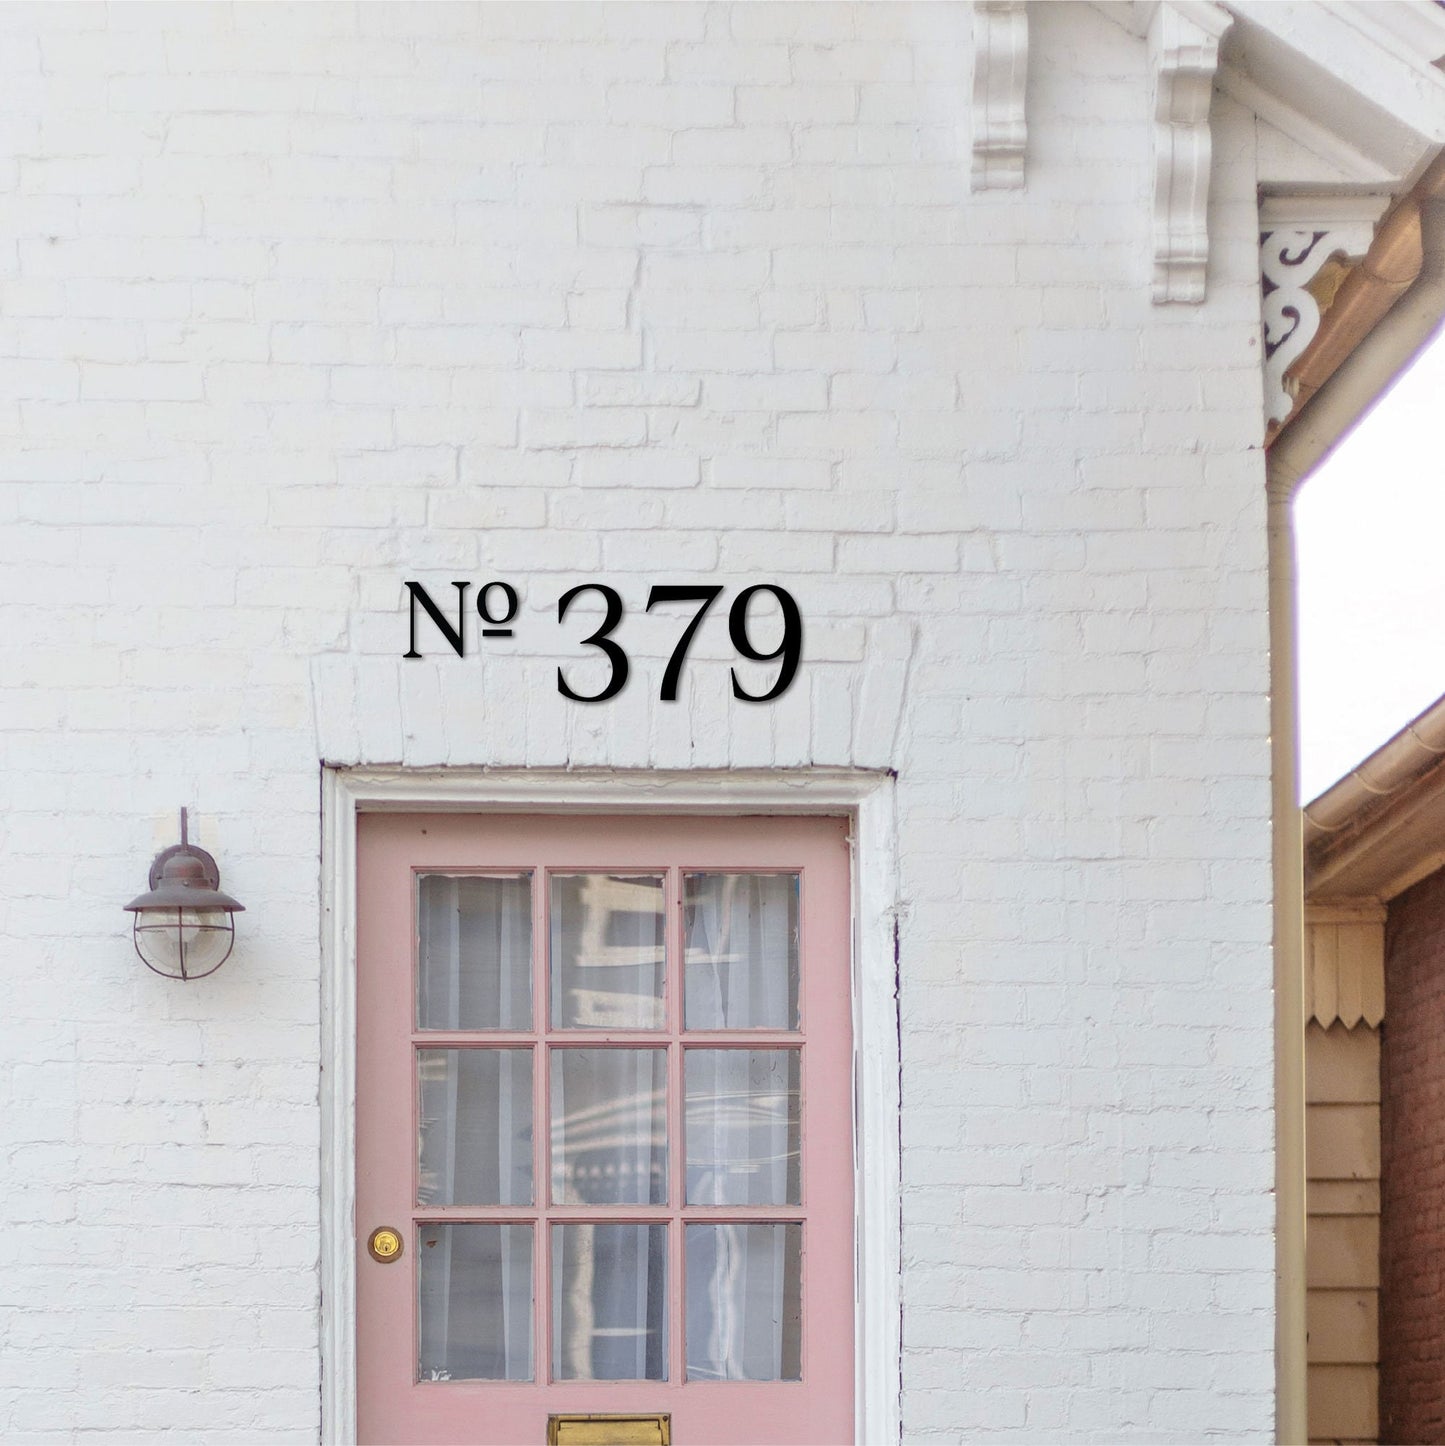 CLASSIC MODERN house numbers and No letters